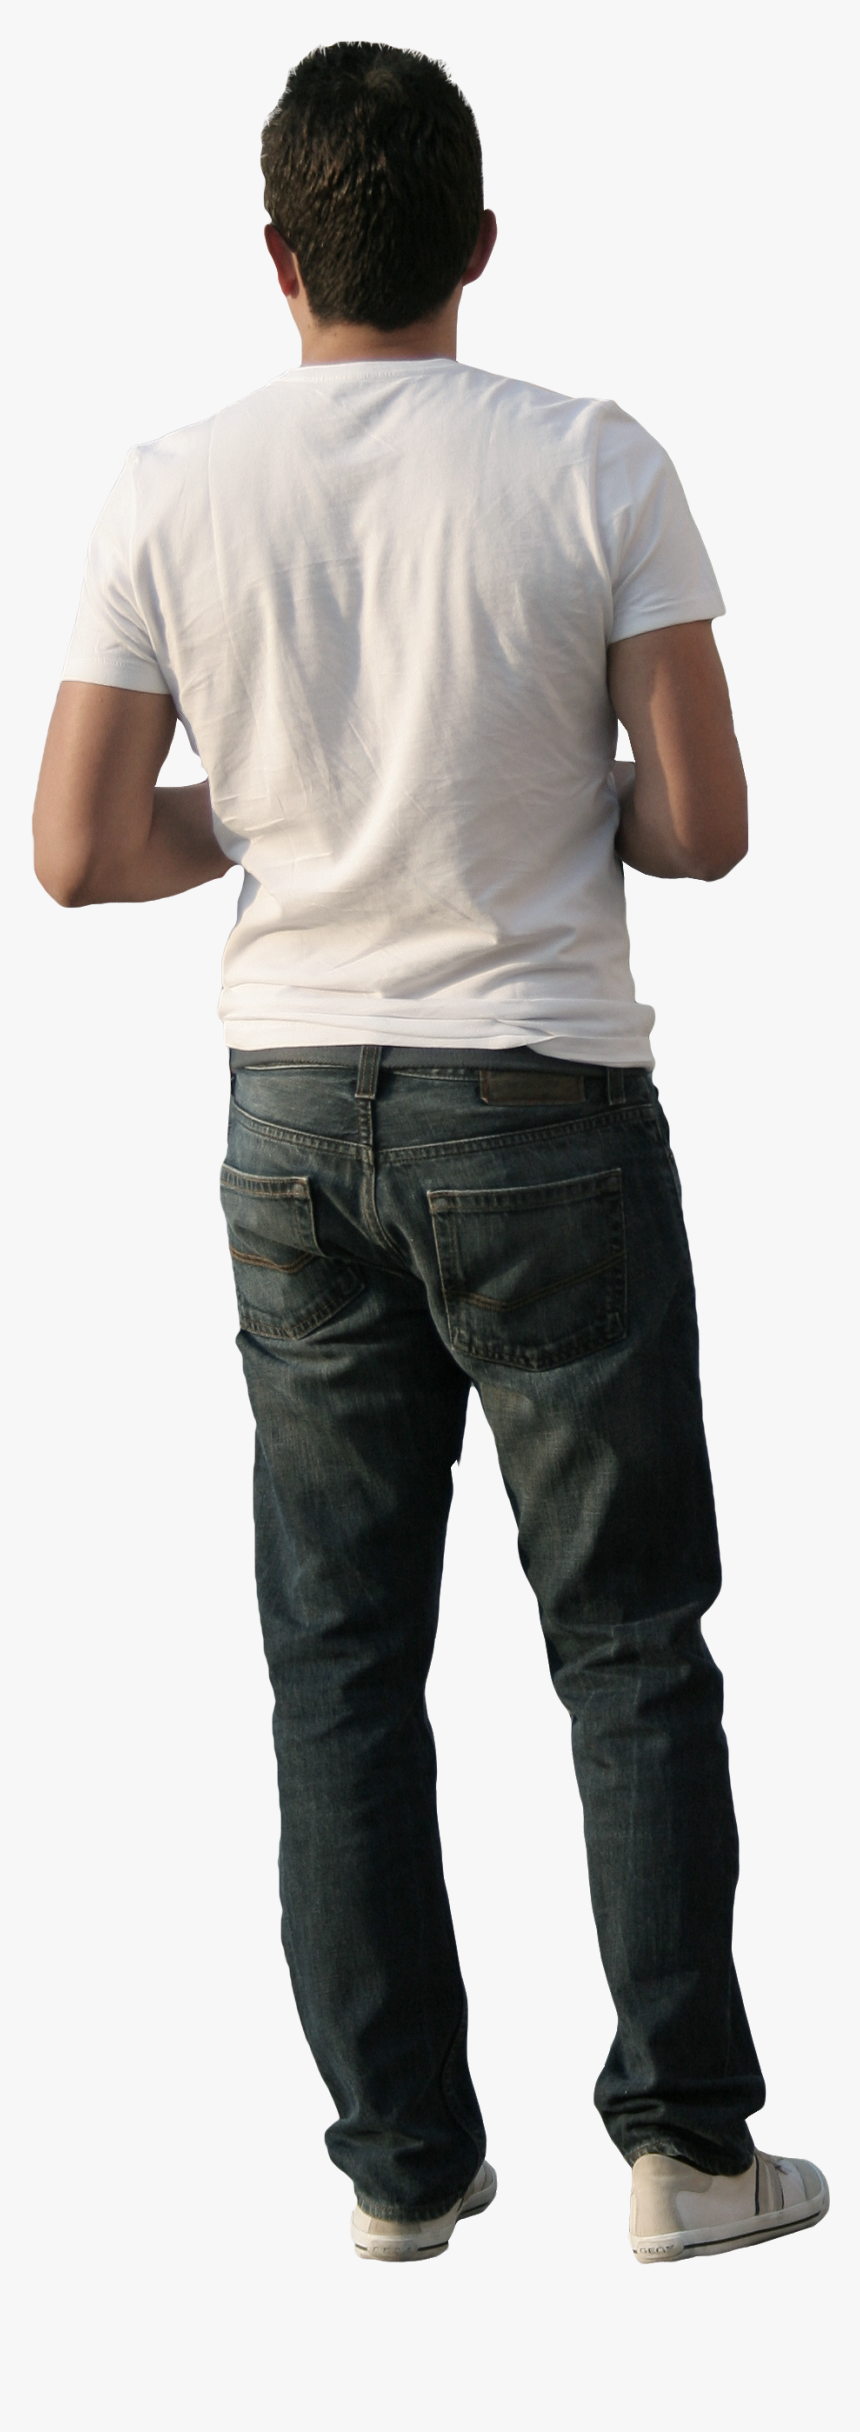 People White Shirt Png, Transparent Png, Free Download